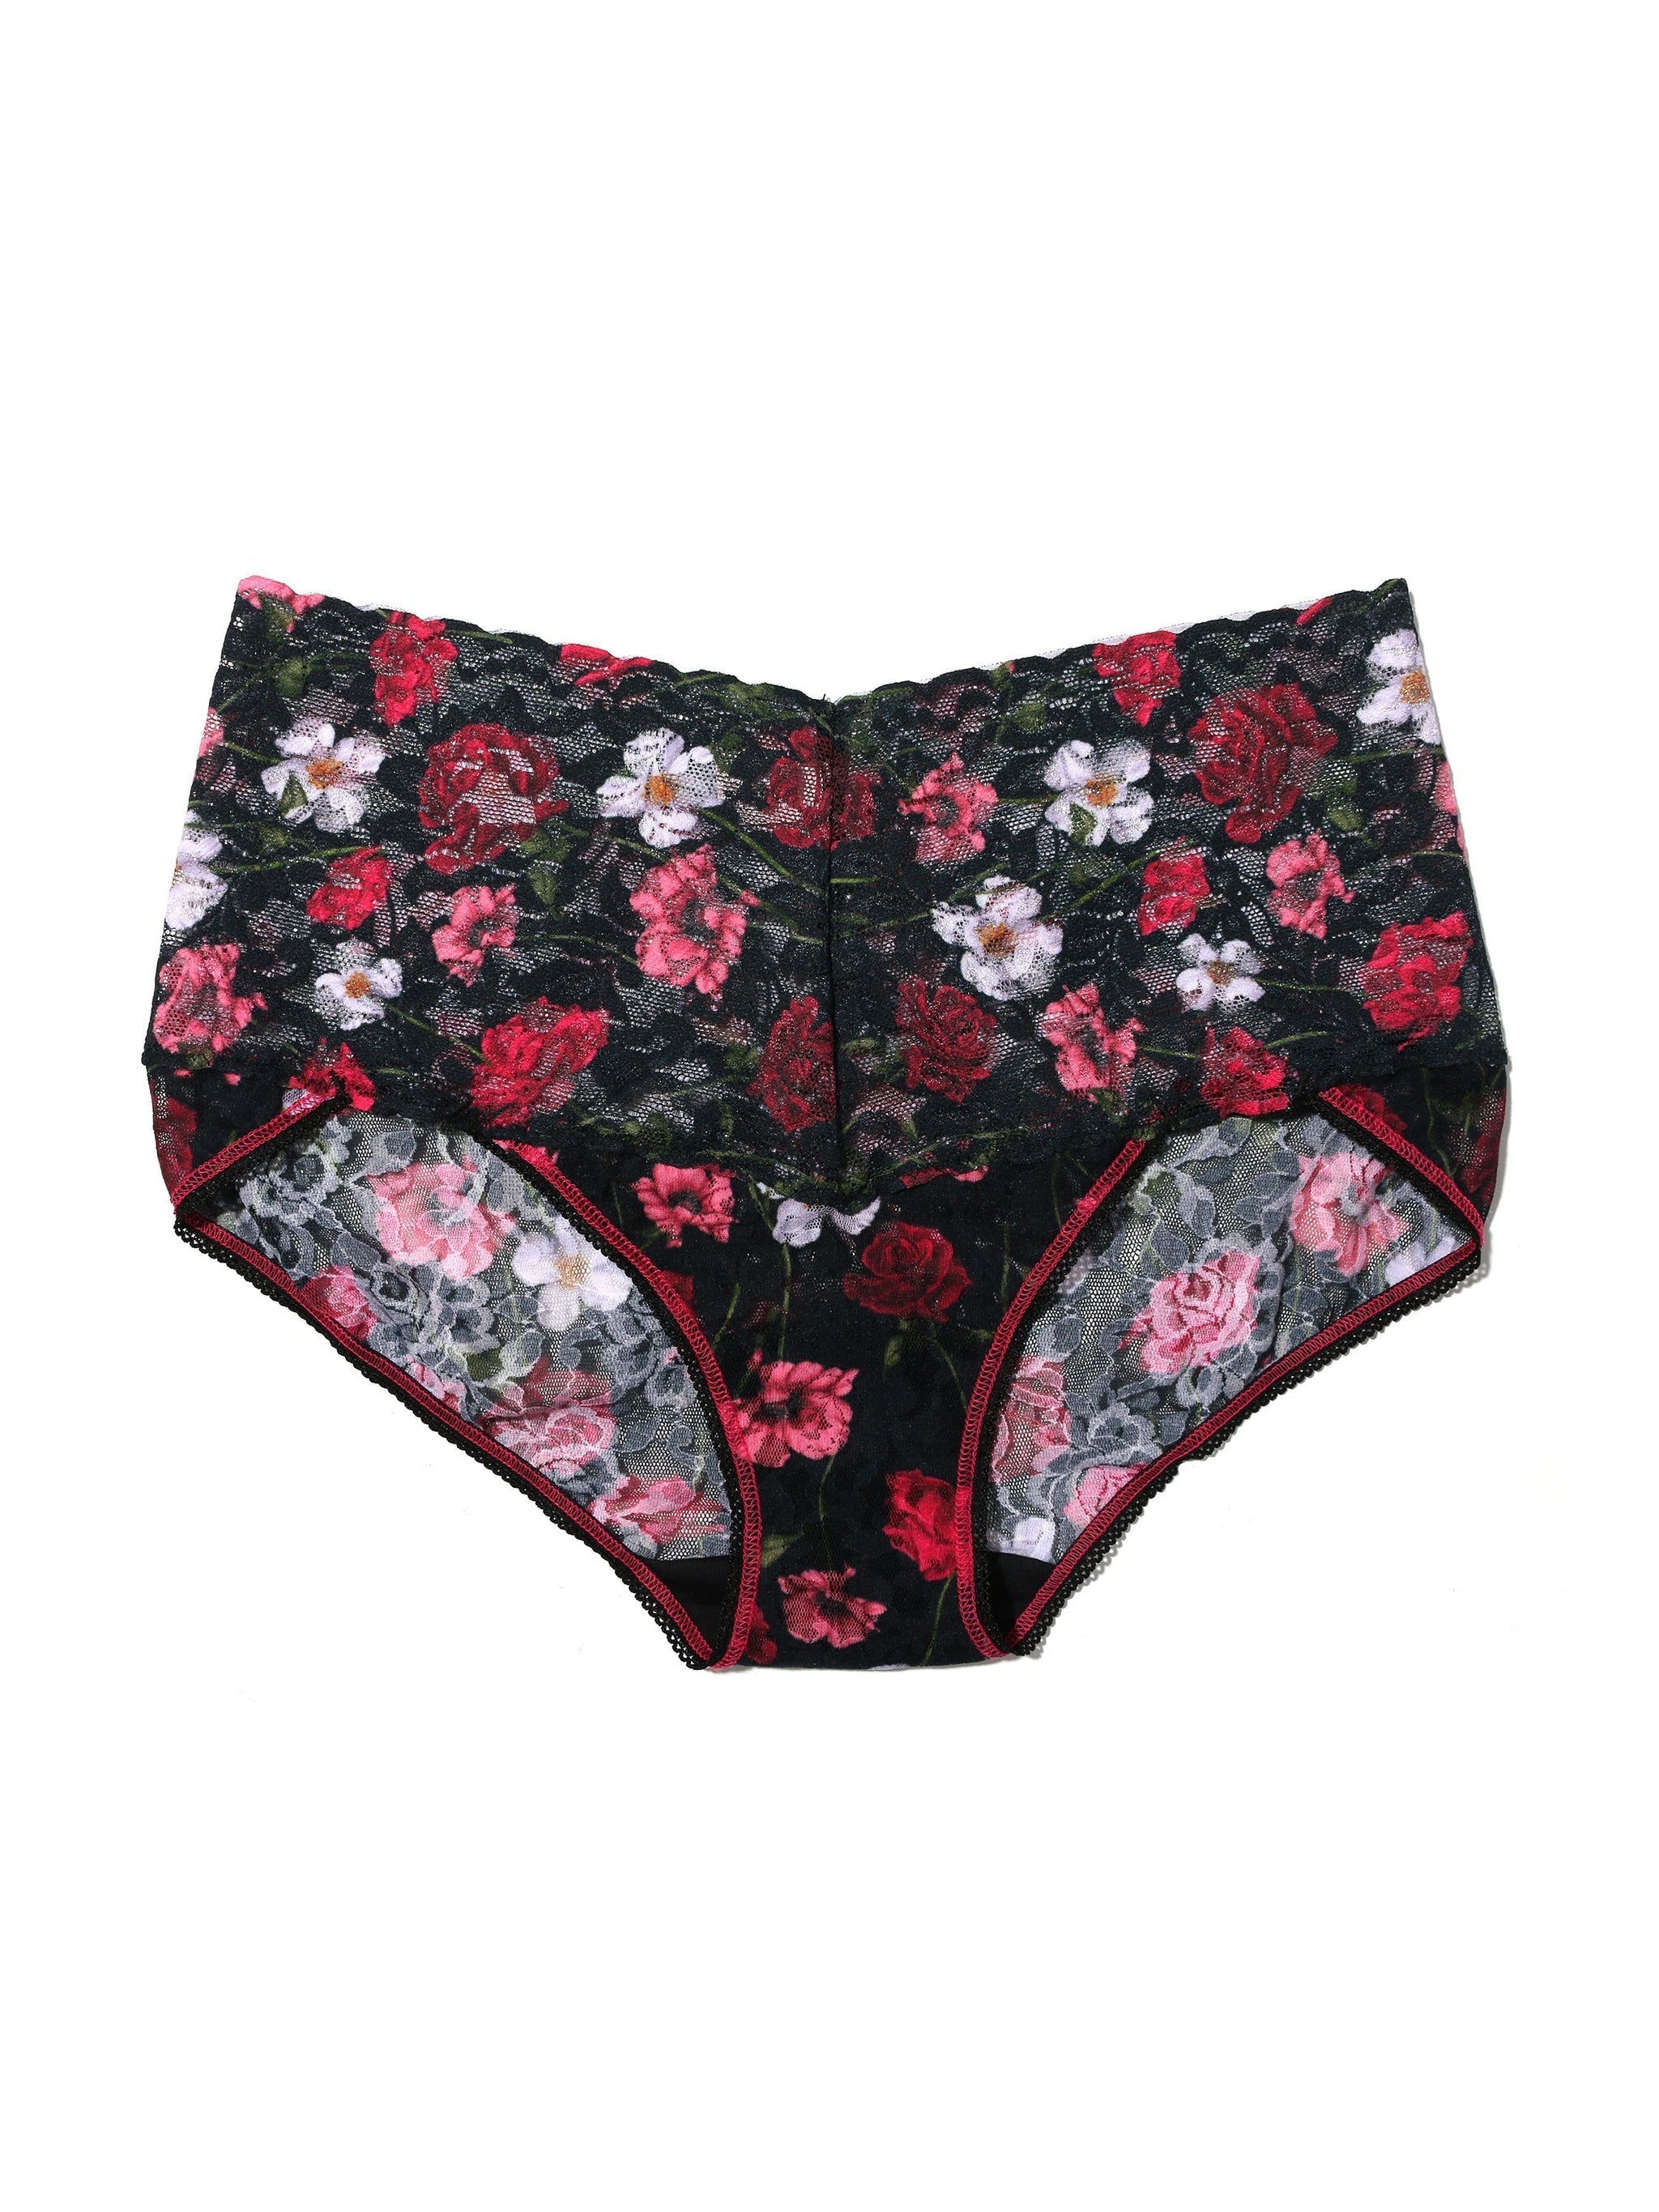 Printed Signature Lace Crotchless Cheeky Hipster Am I Dreaming